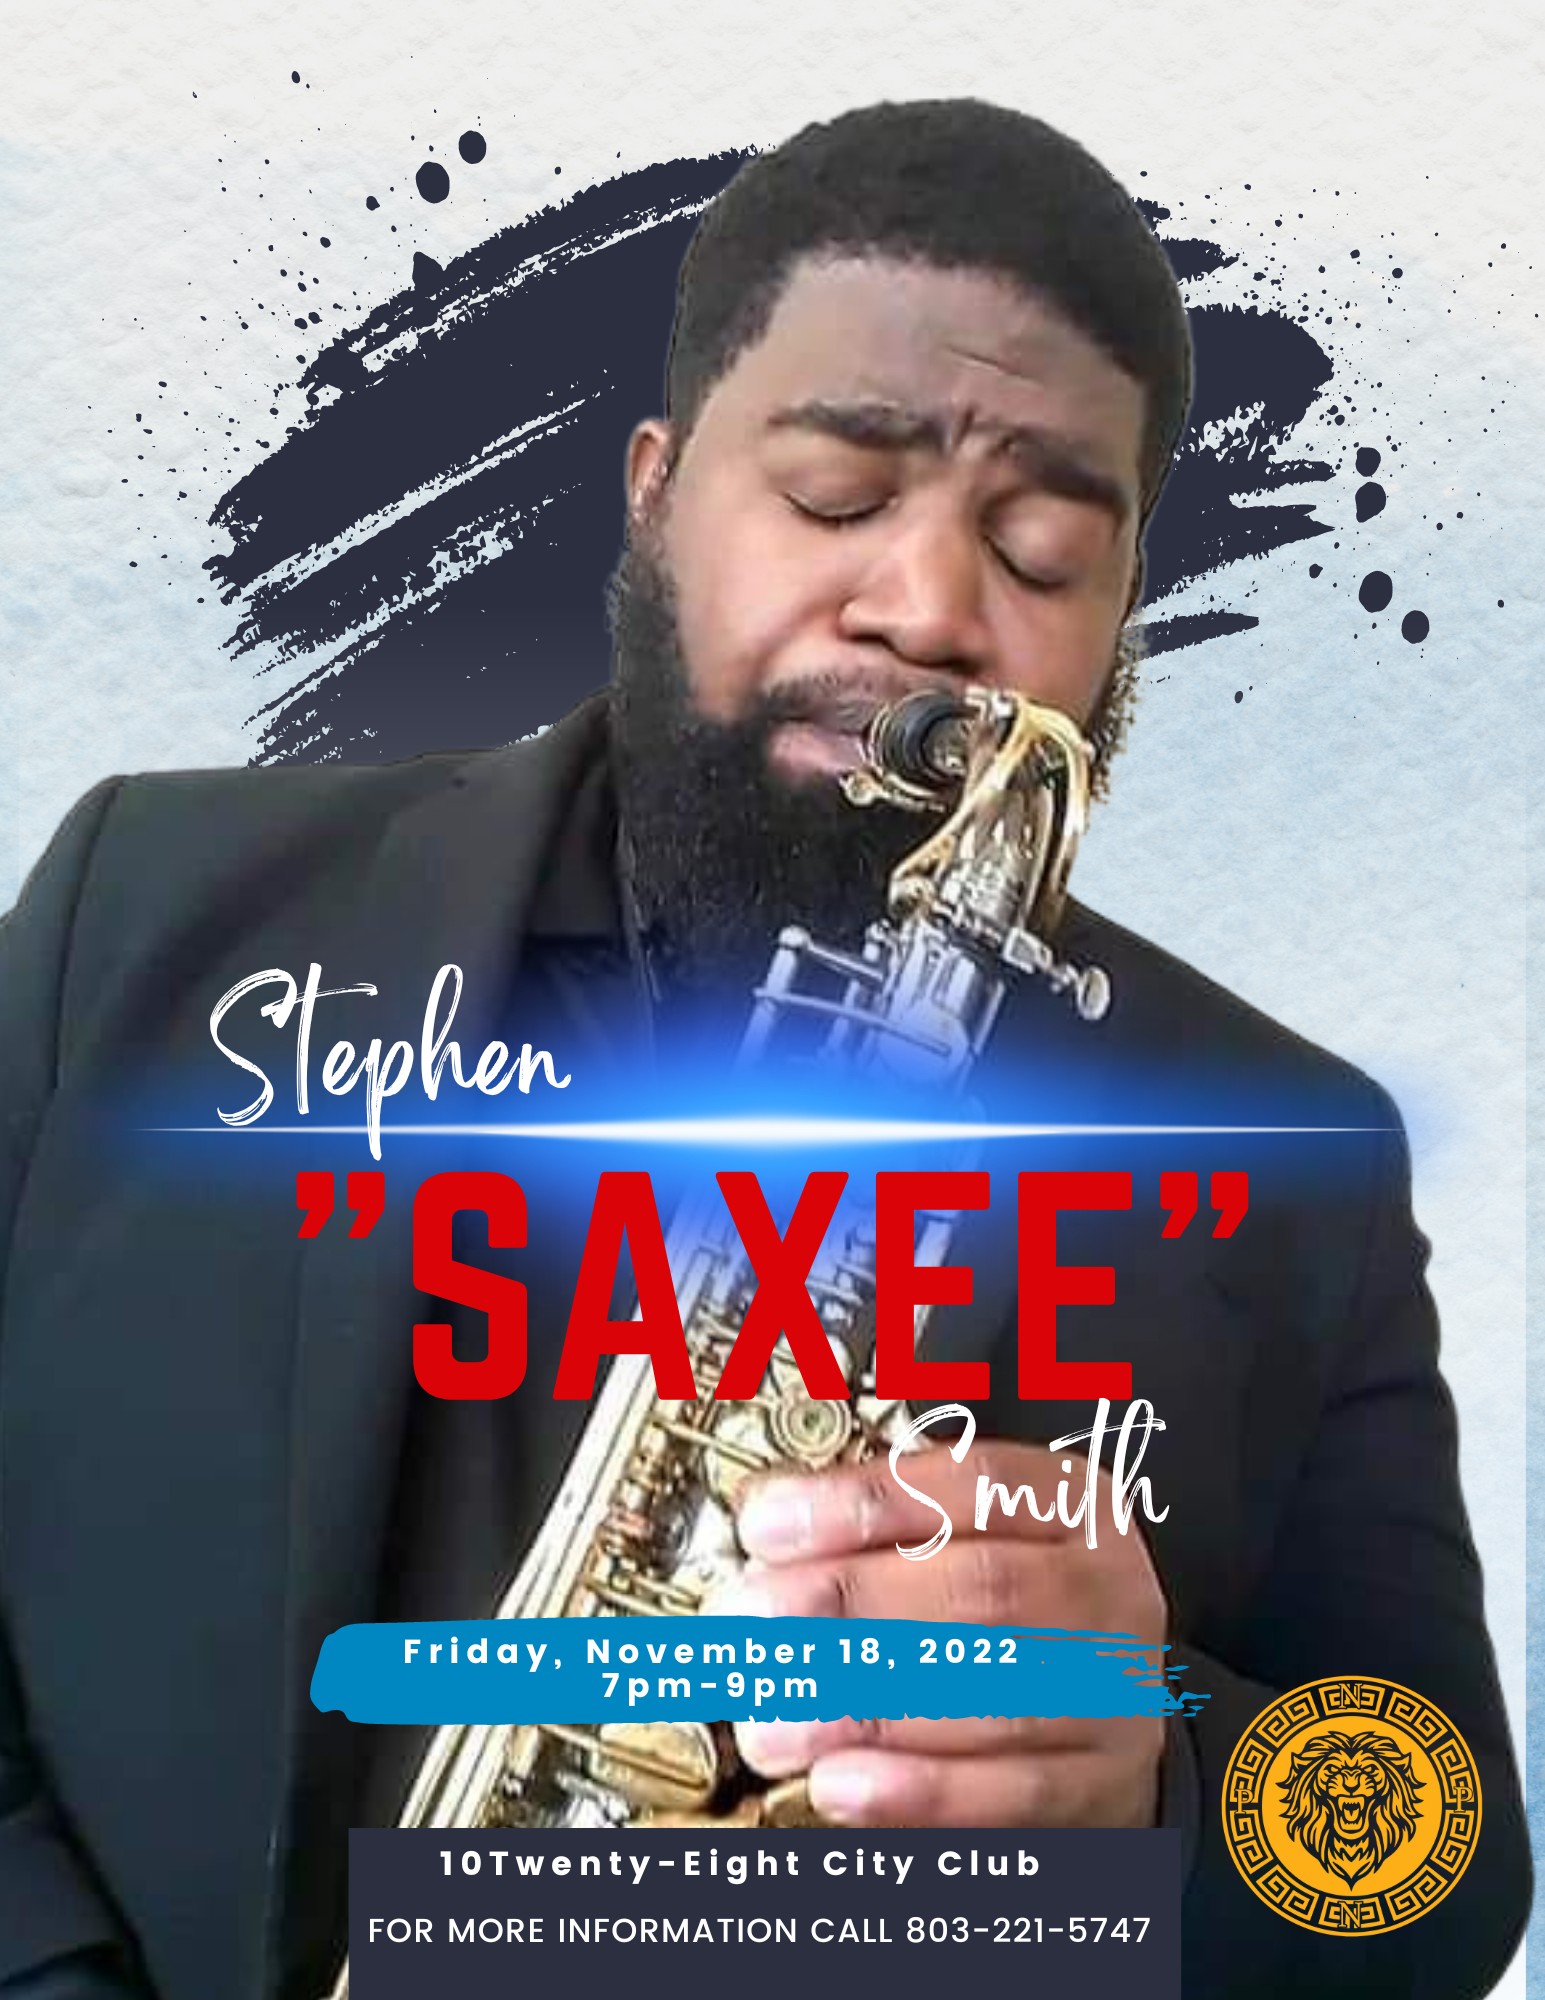 image showing Stephen "Saxee" Smith playing a saxophone. He is a brown skinned man with a beard, wearing a black suit and black button down shirt.